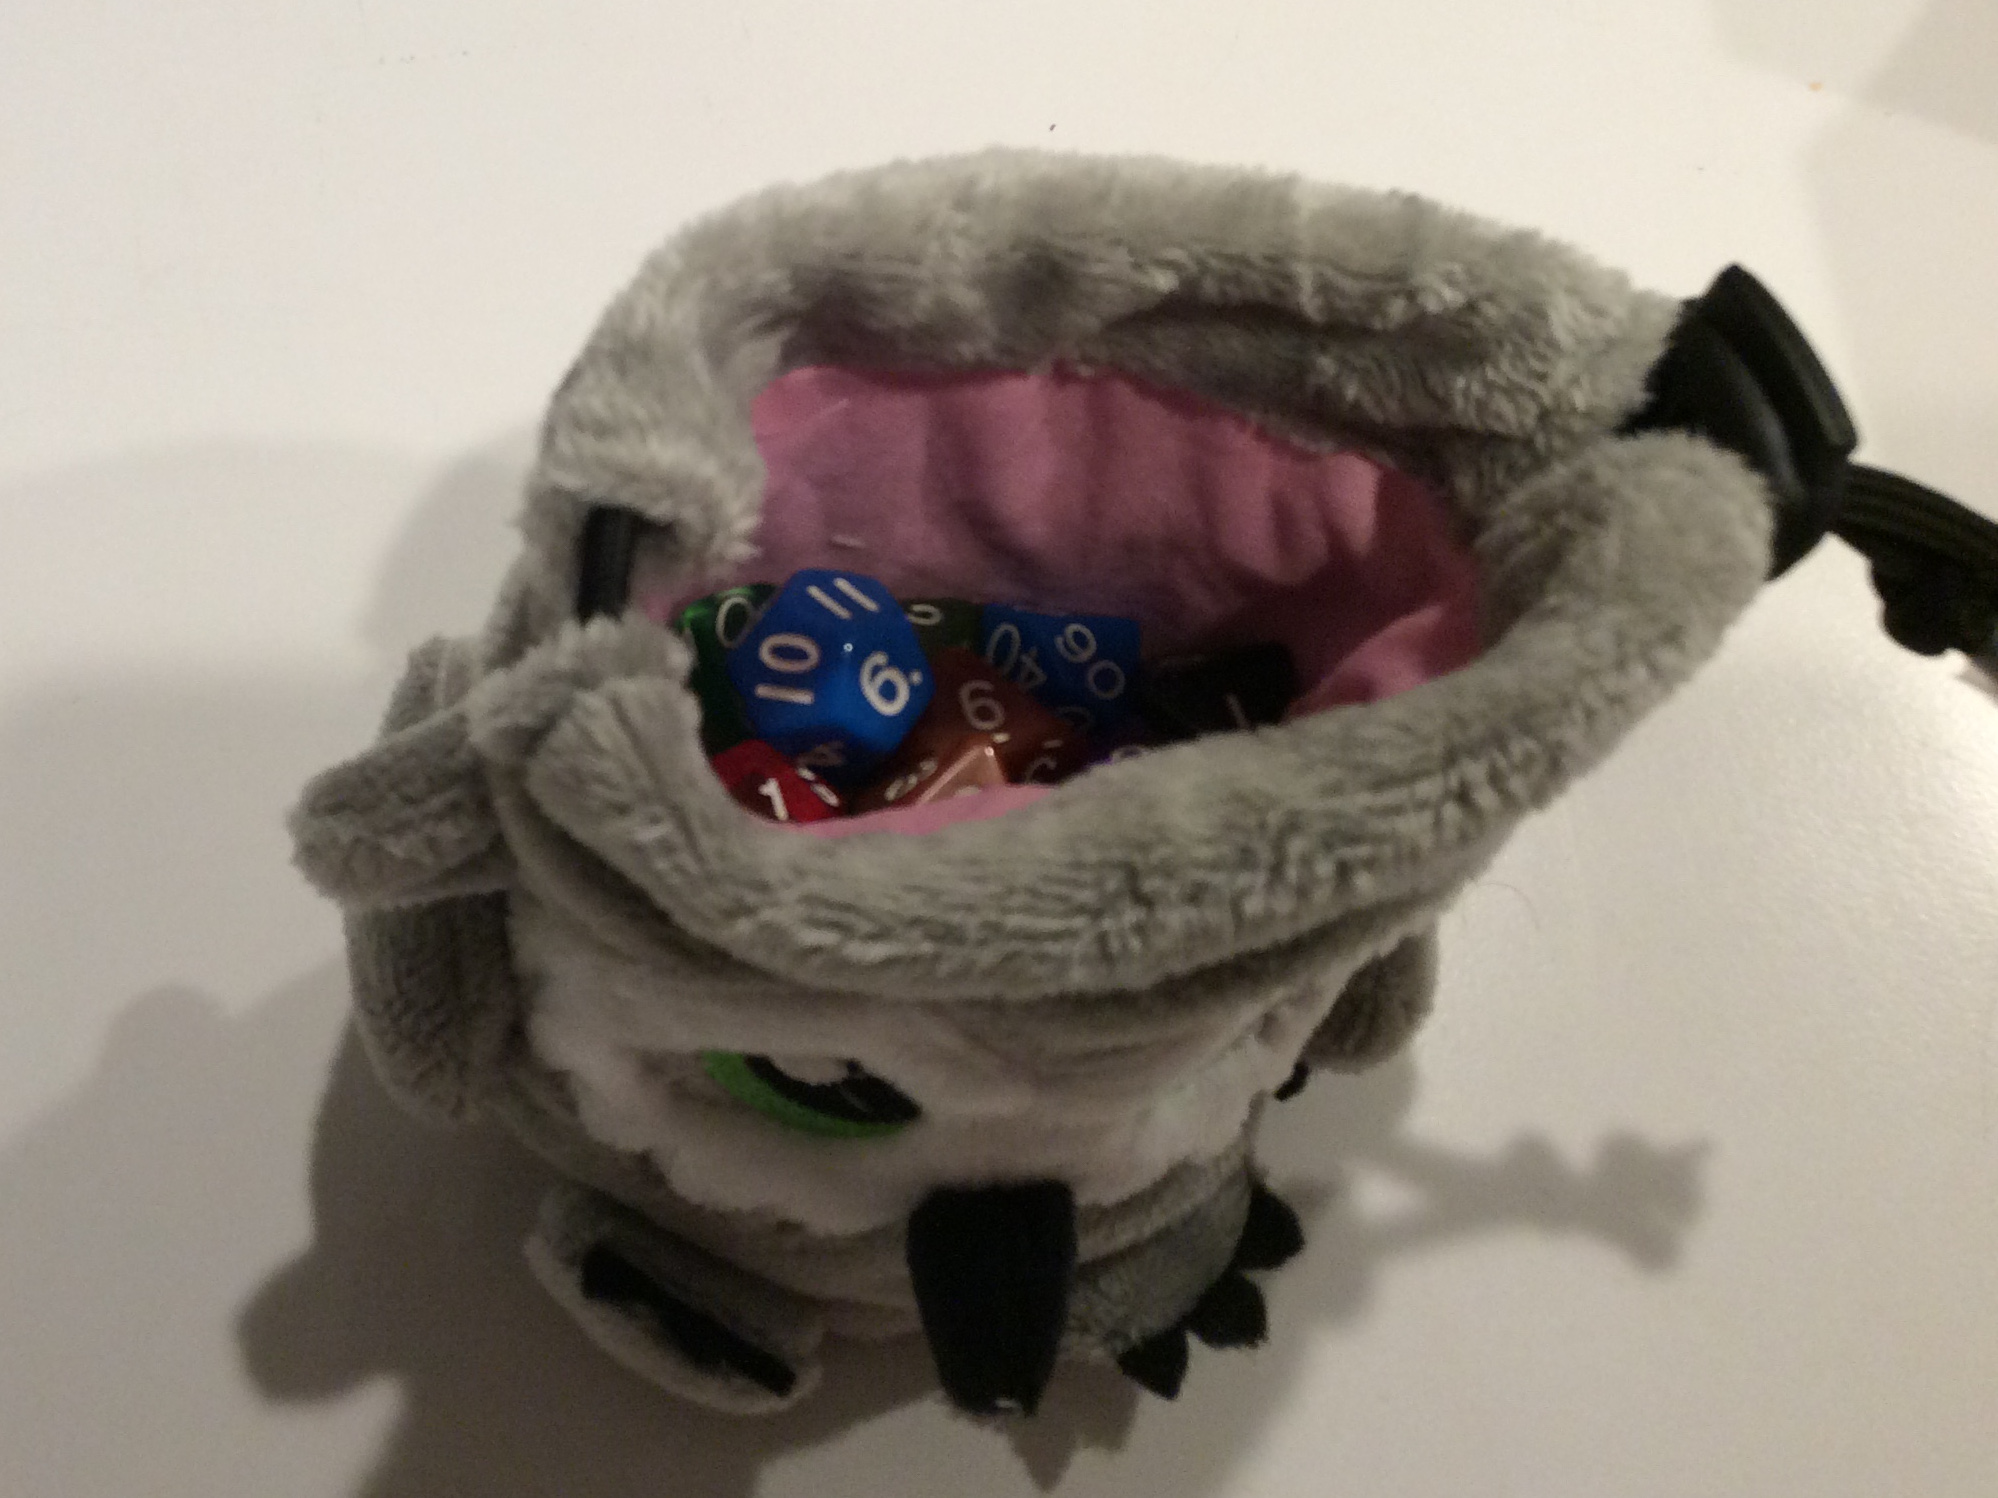 Looking into the drawstring opening of a tiny plush owlbear that is also a dice bag.